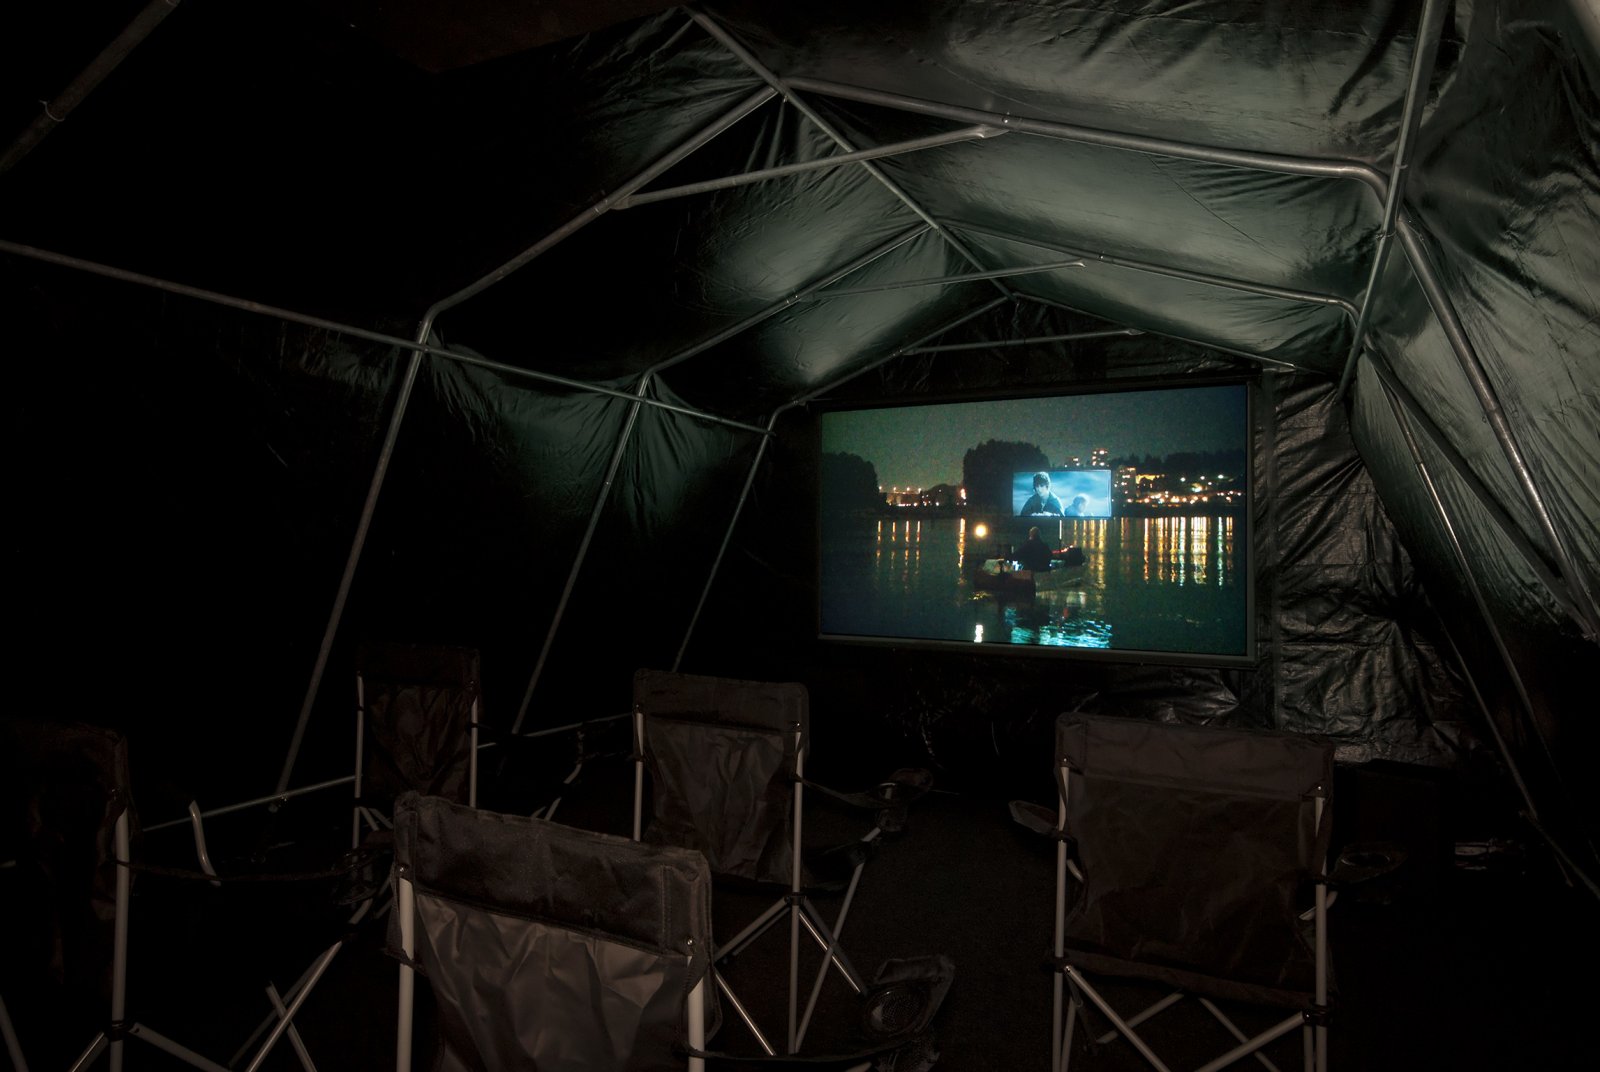 Kevin Schmidt, Autonomous Projection Room #1, 2010, tarp, portable garage frame, carpet, roxul, projector, home stereo system, screen, batteries, inverter, camping chairs, 181 x 60 x 105 in. (460 x 152 x 267 cm)